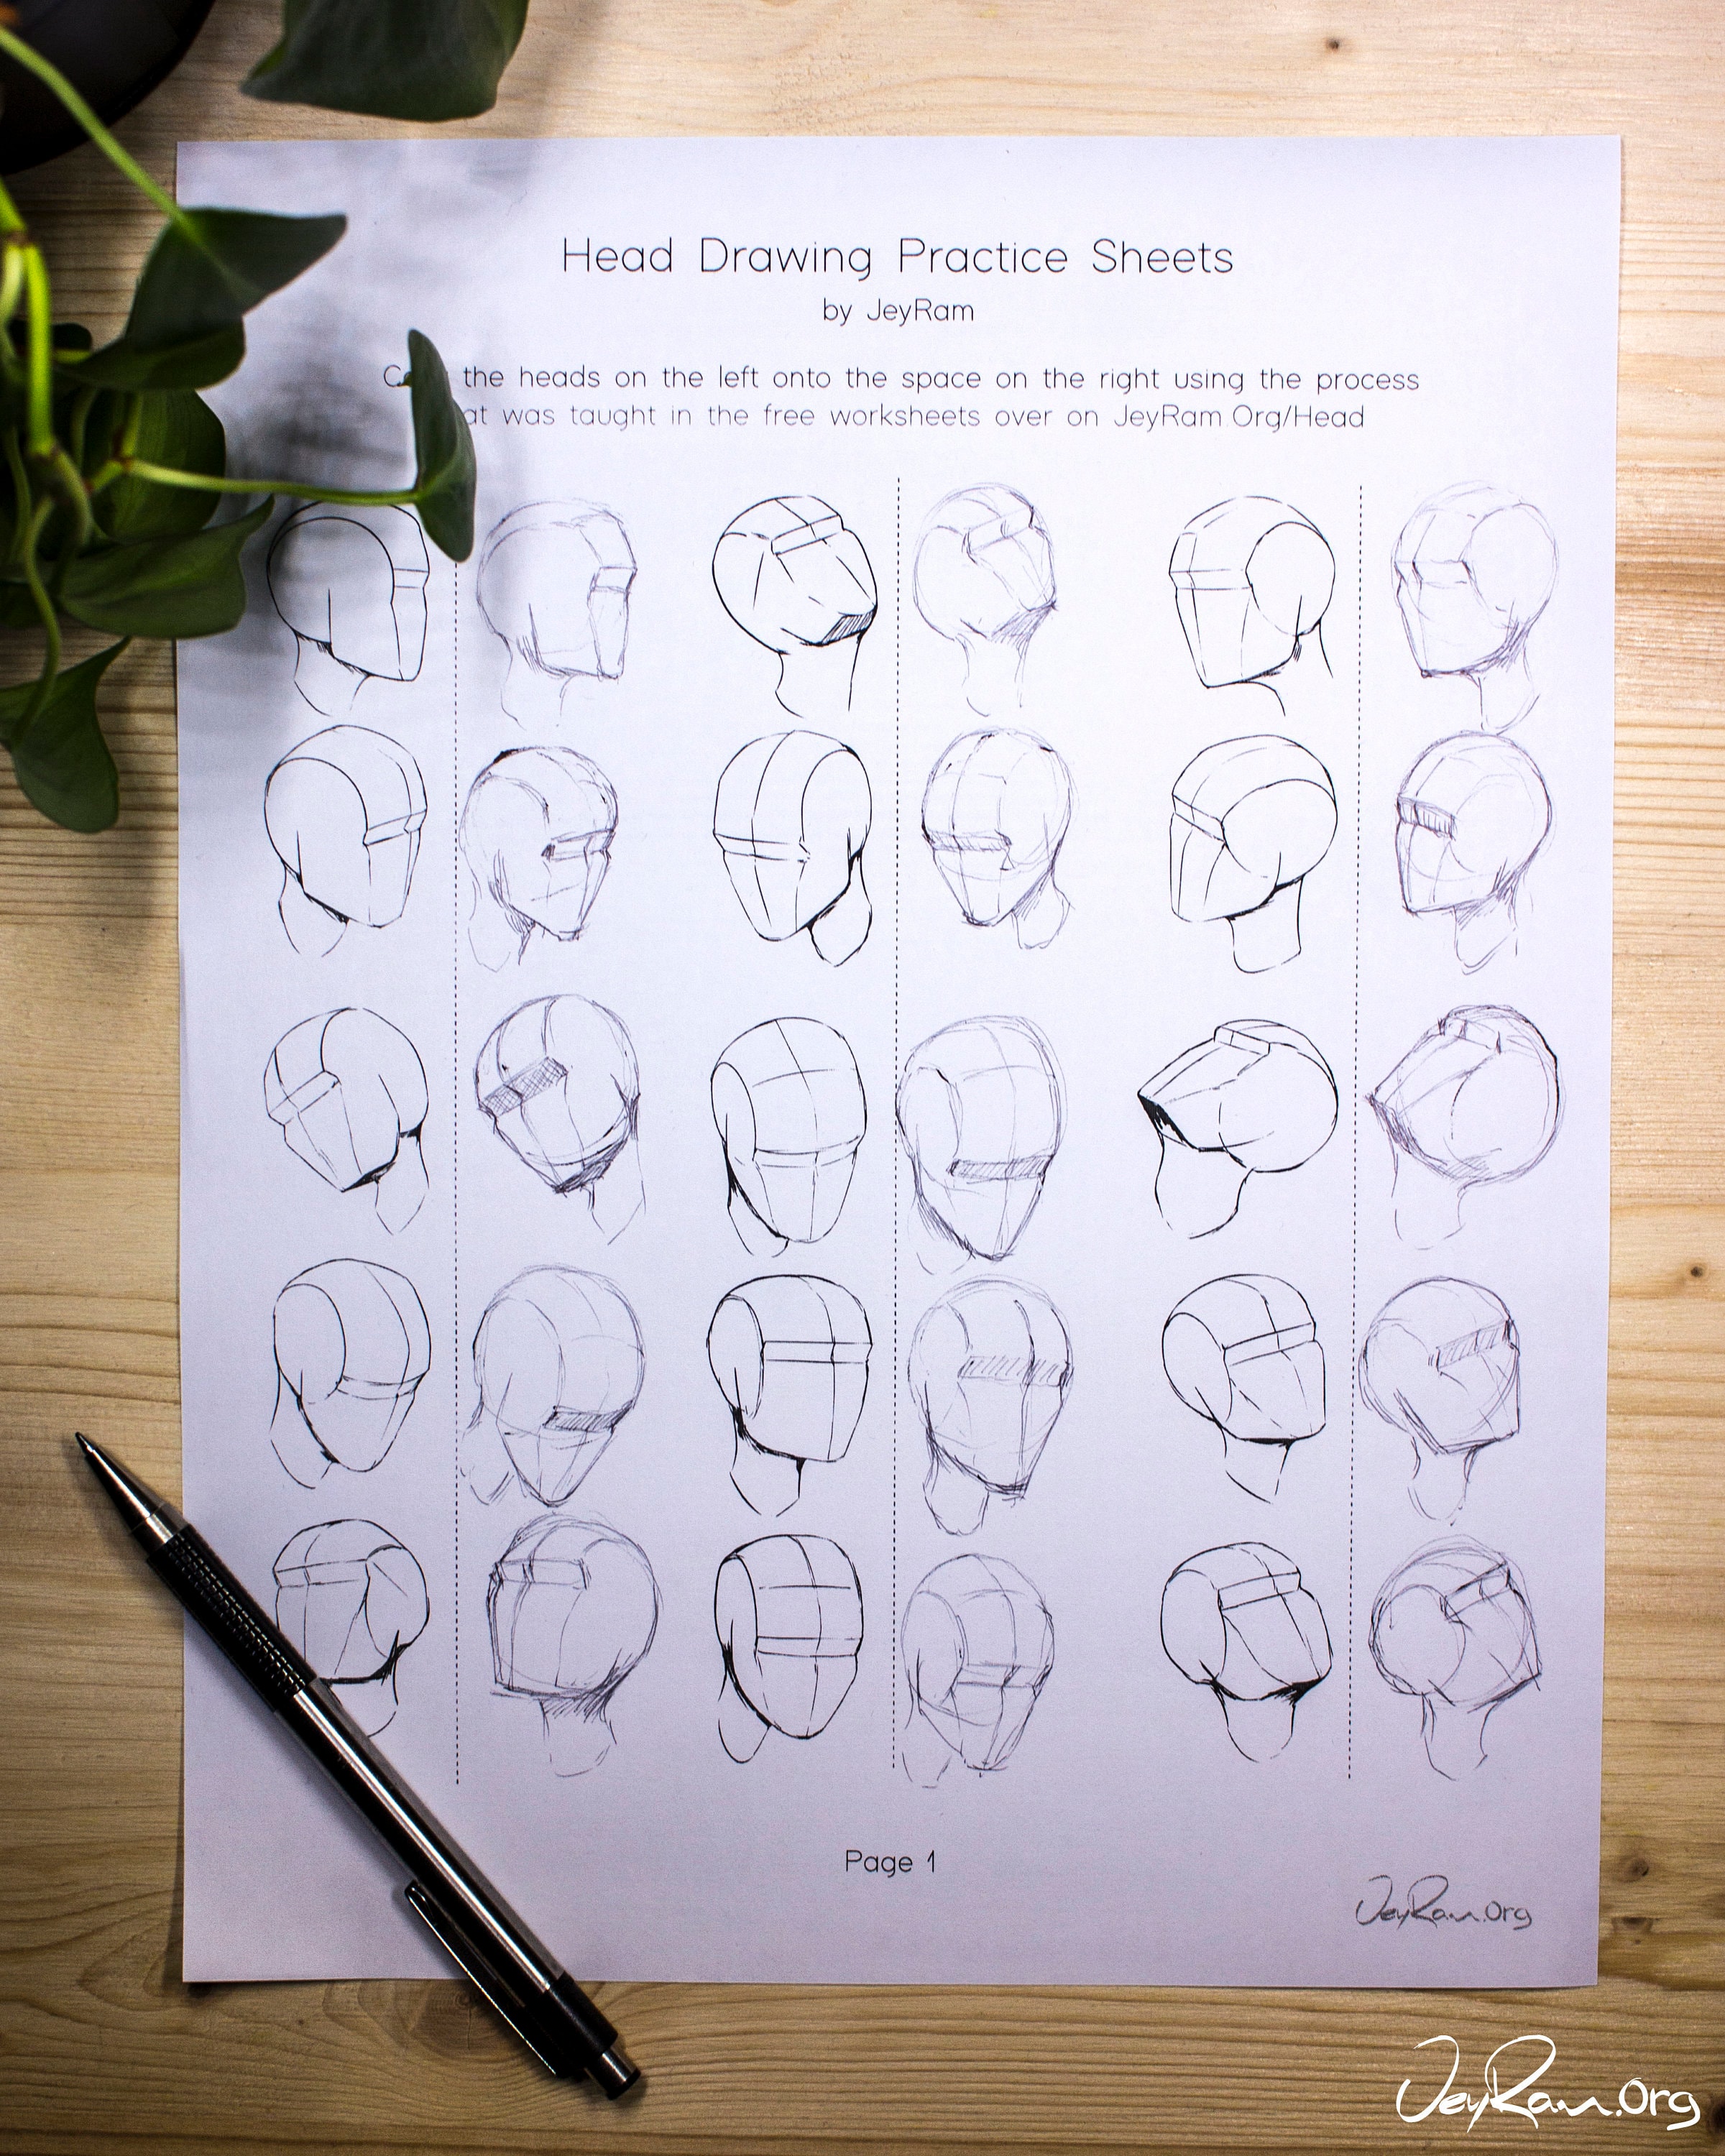 6 Sketching Exercises to Transform Your Drawing | Craftsy | www.craftsy.com